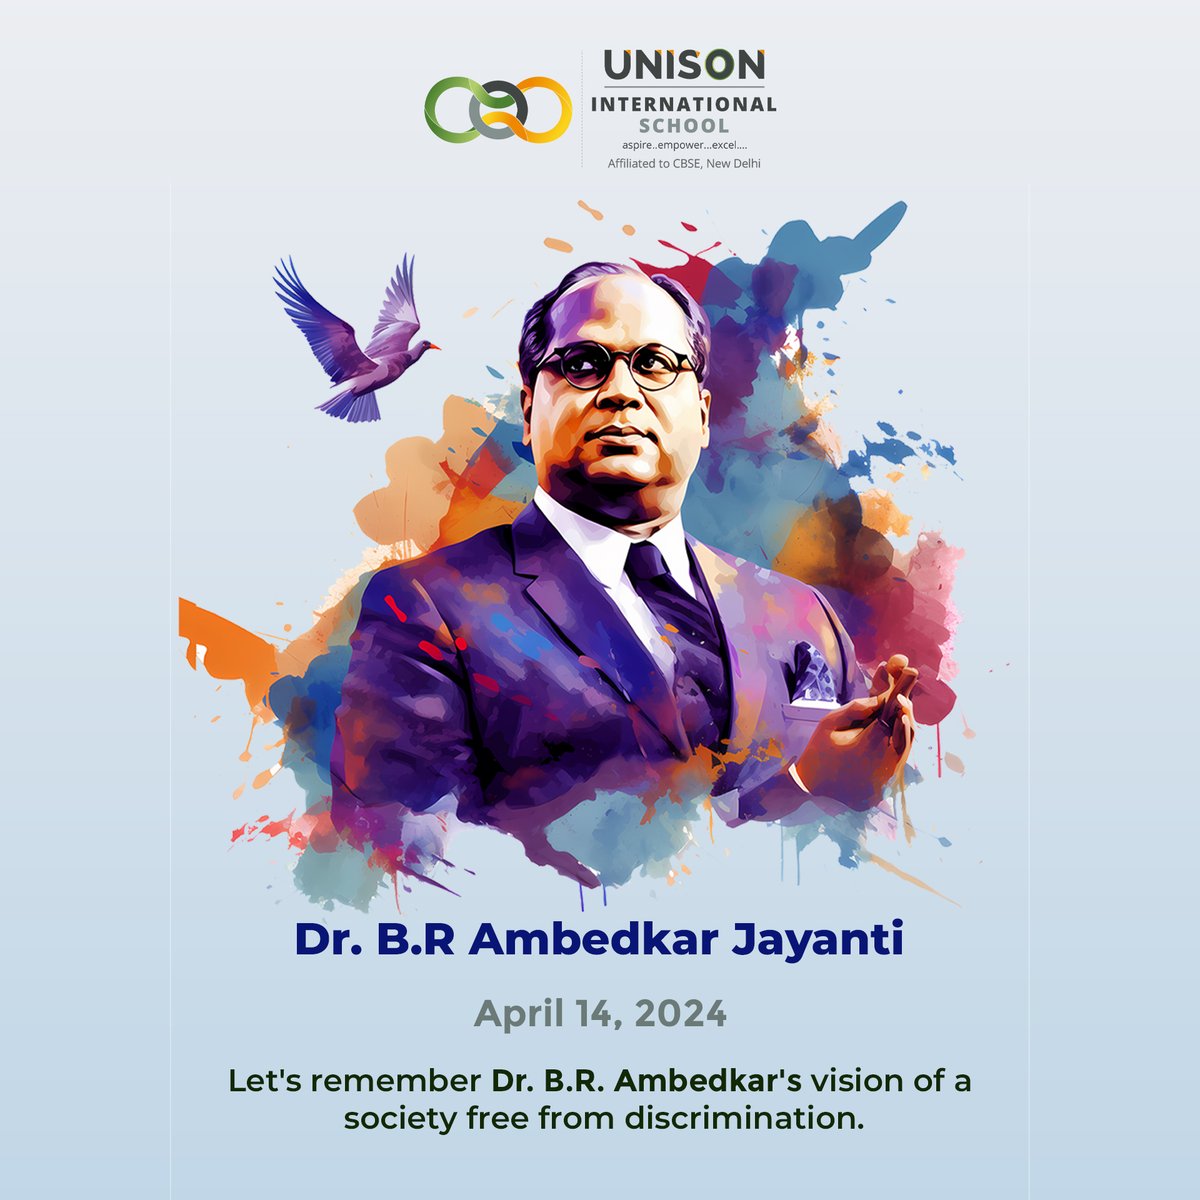 Remembering the scholar, statesman, and social reformer, Dr. B.R. Ambedkar, on his Jayanti. Let's honour his legacy by actively striving for a society free from discrimination and inequality🌟📘

#BRAmbedkar #SocialJustice #UnisonInternationalSchool #Excellence #Academics